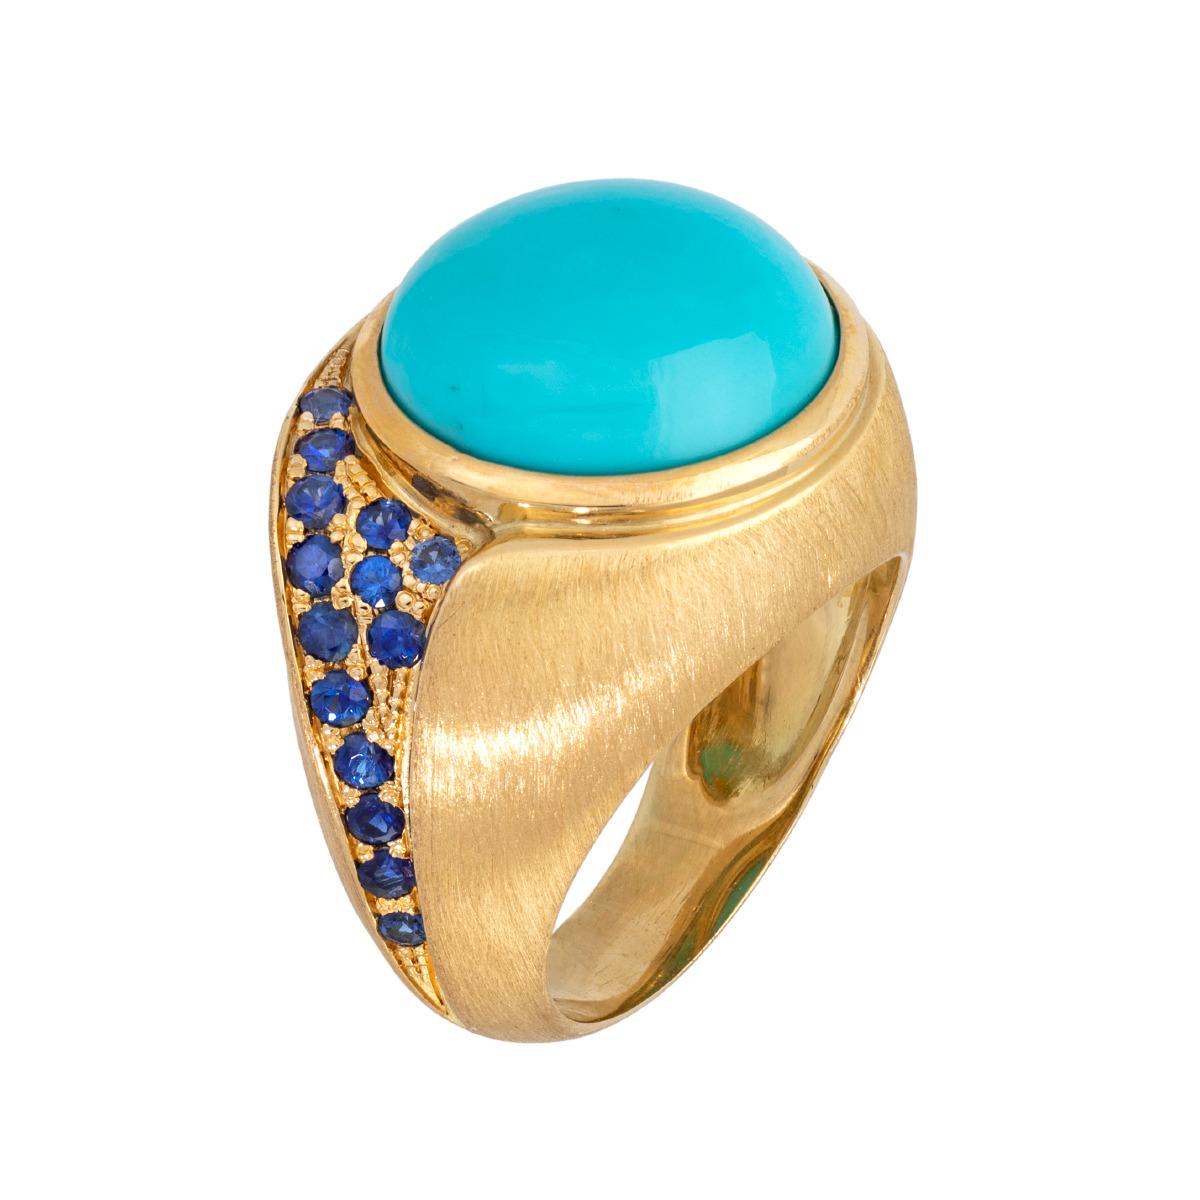 Contemporary 18k Gold Ring with Turquoise Stone and Blue Sapphires, by Gloria Bass For Sale